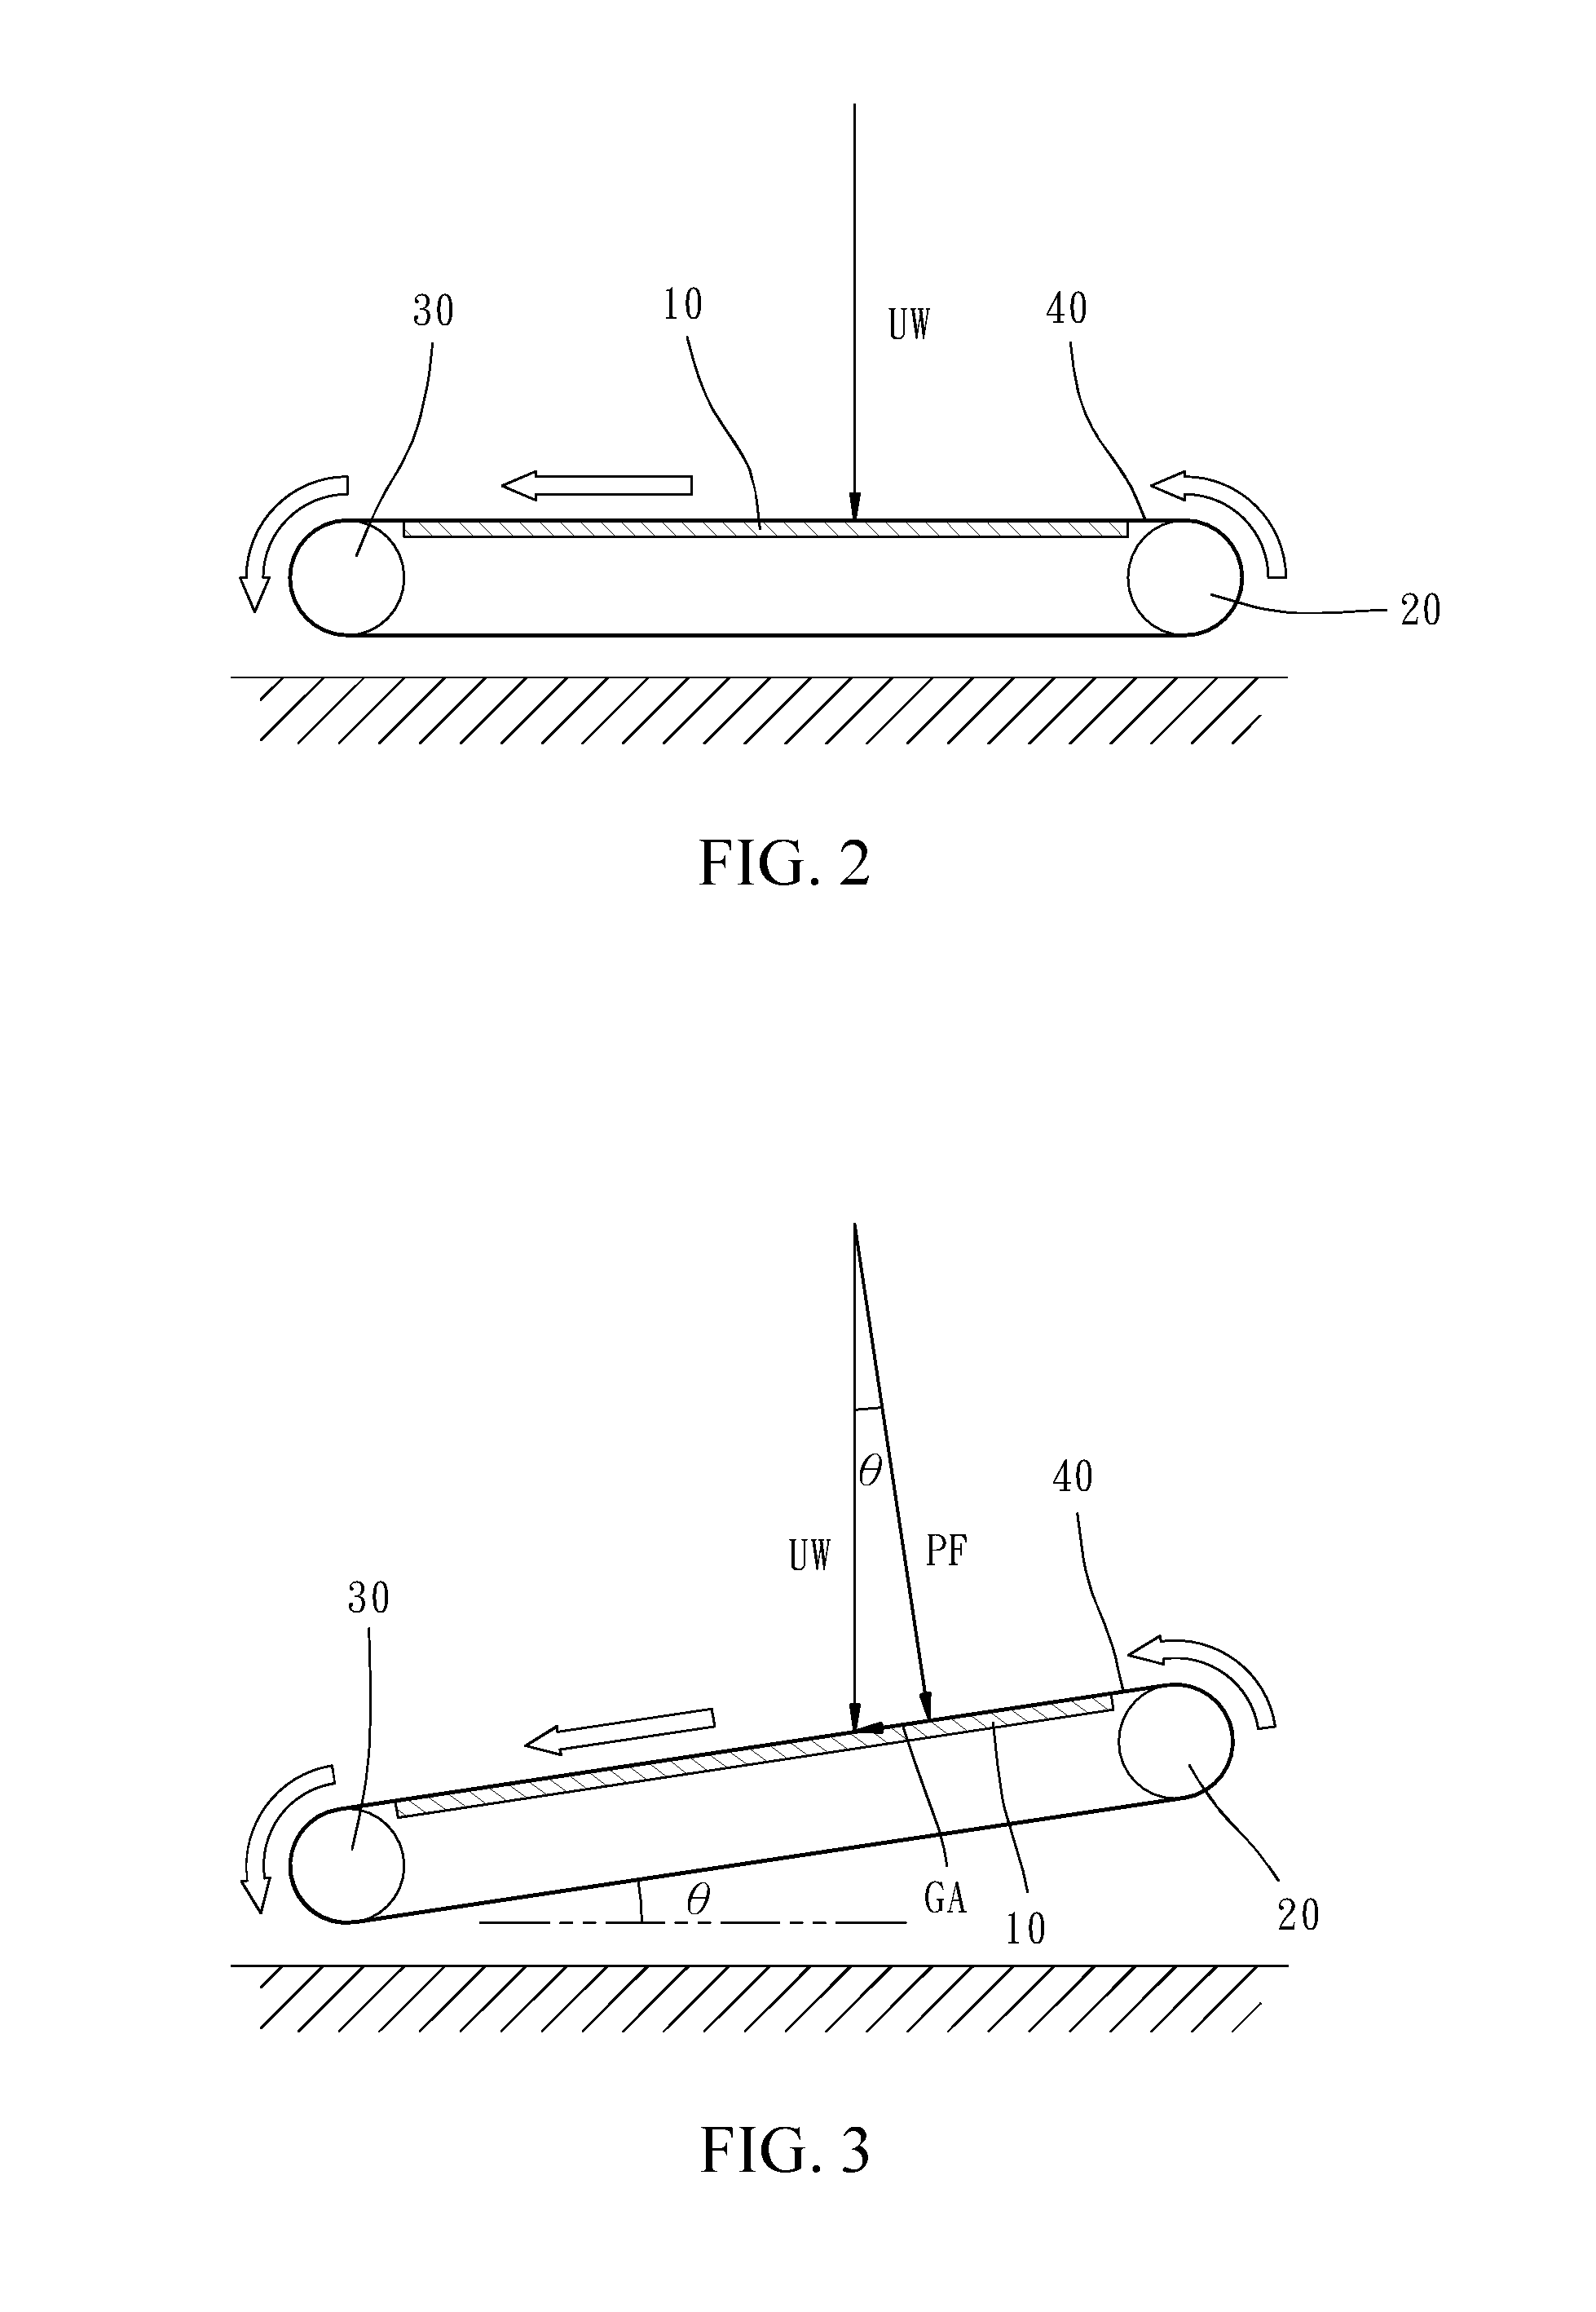 Method of detecting a lubrication status between a deck and a belt of a treadmill